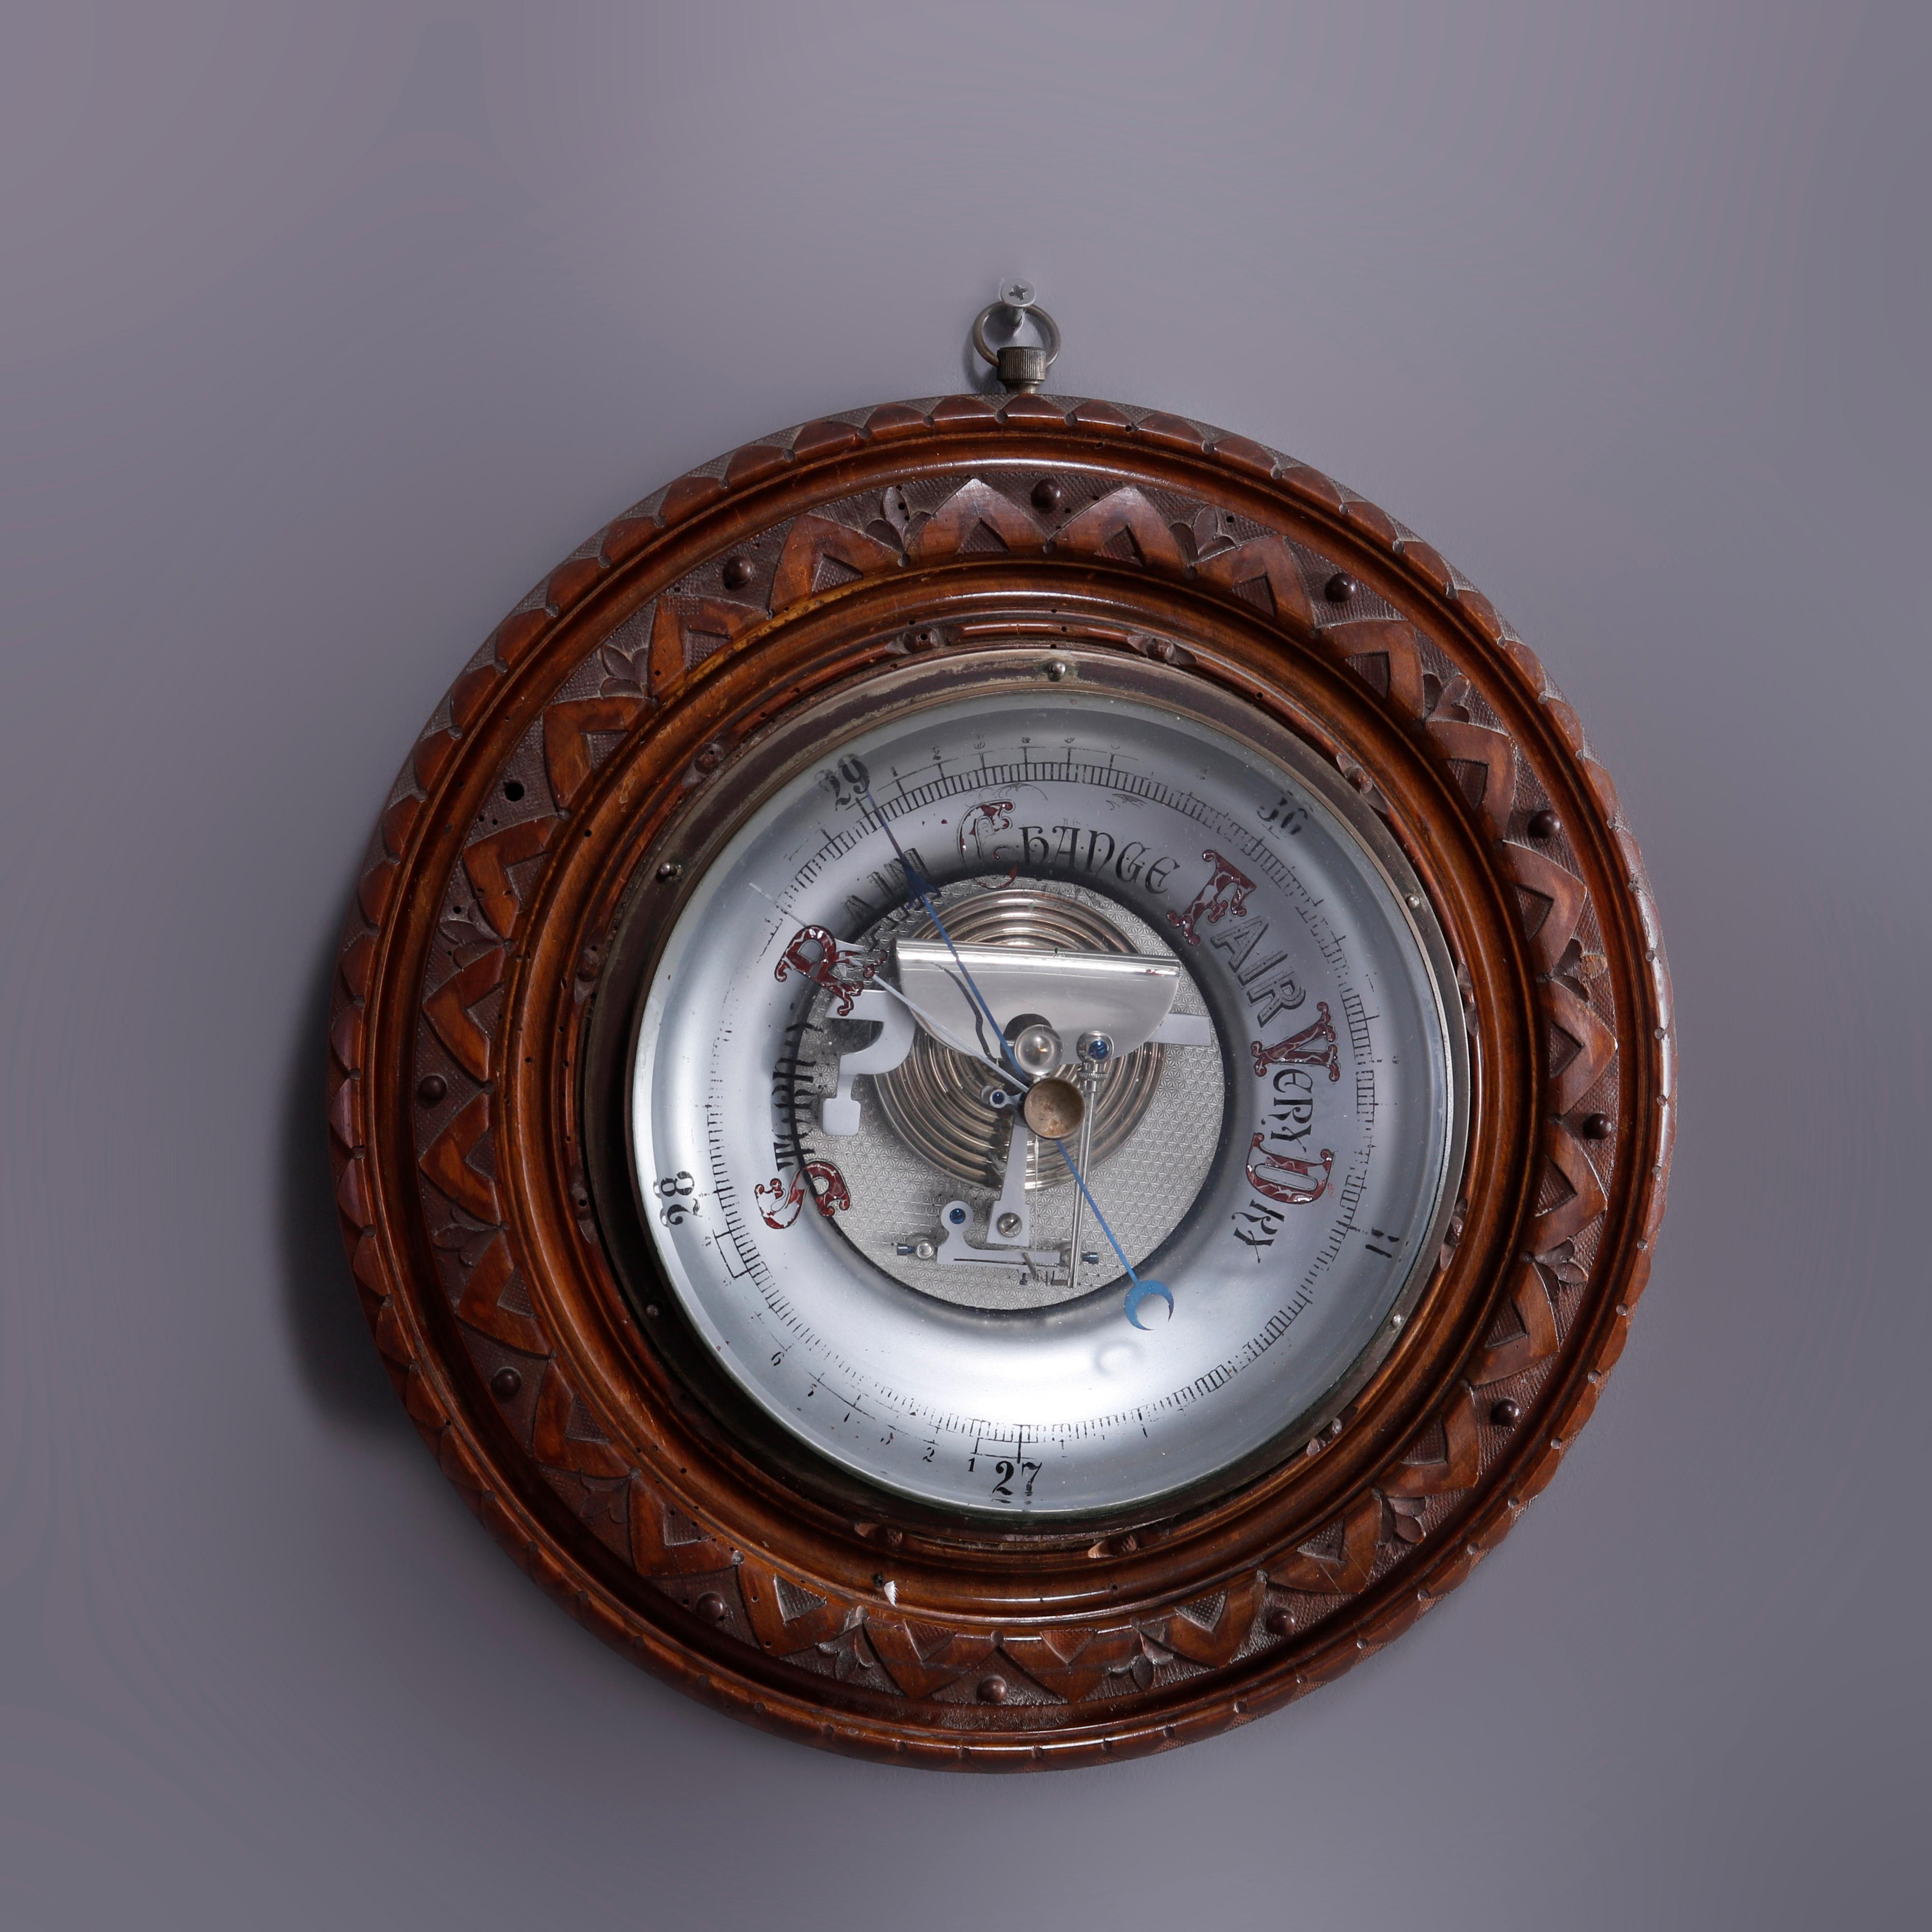 An antique wall barometer offers walnut frame with carved stylized foliate elements, c1890

Measures: 14